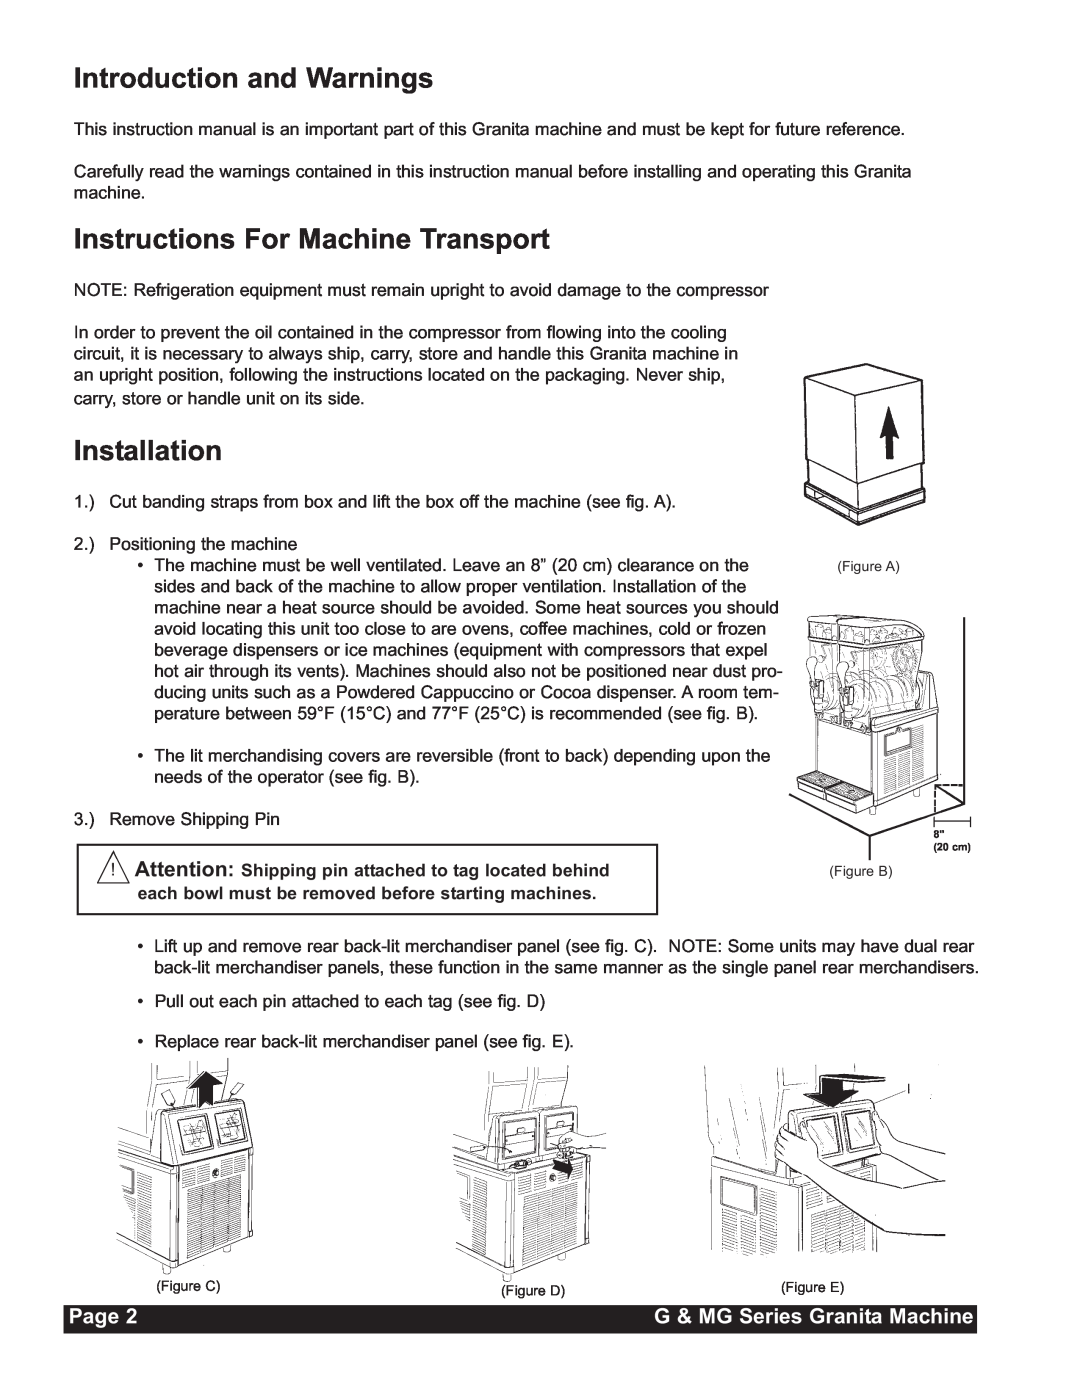 Grindmaster MG235-2B, MG236-2B, MG23-2B Introduction and Warnings, Instructions For Machine Transport, Installation, Page 